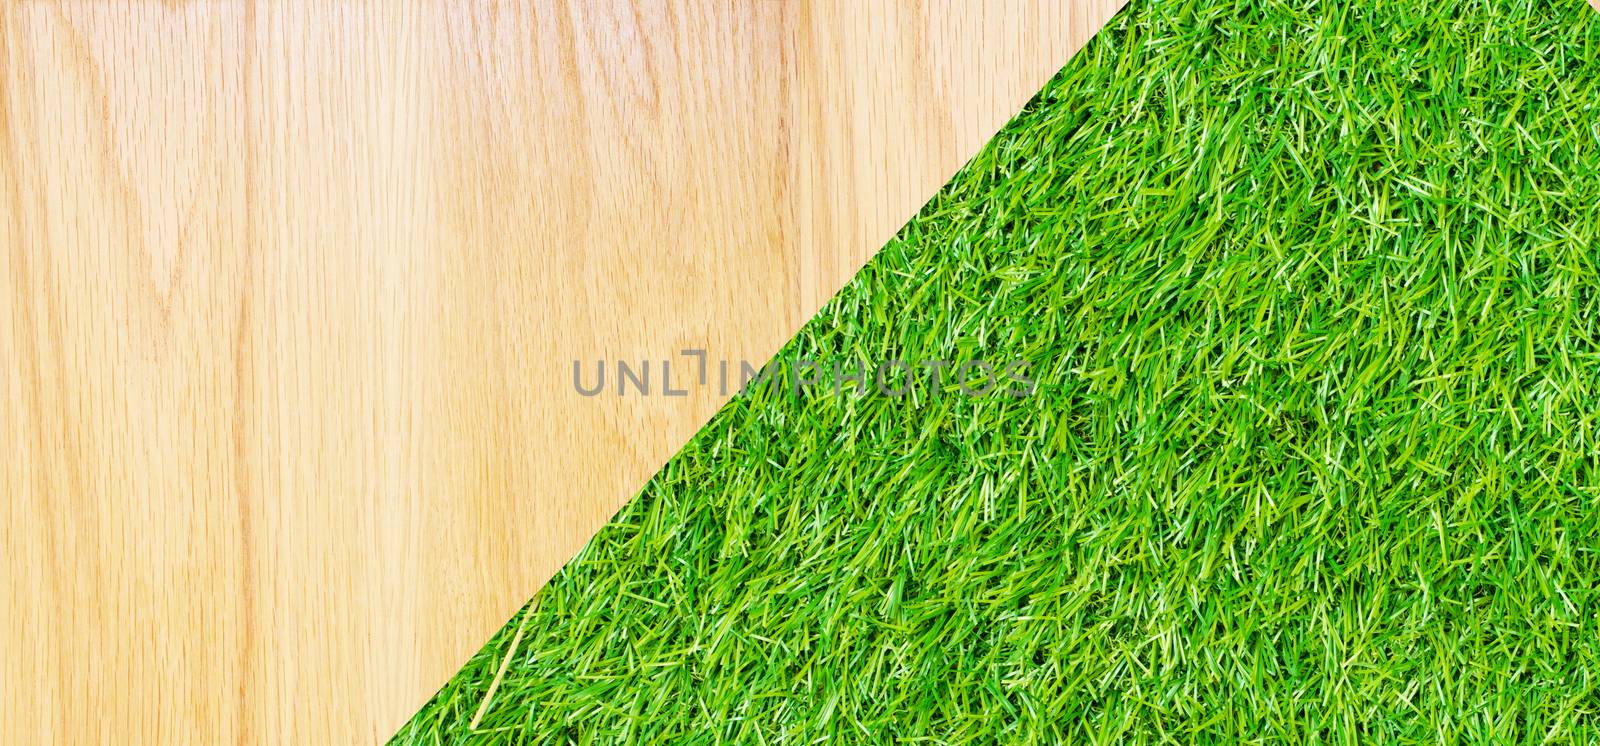 brown wooden with green grass background